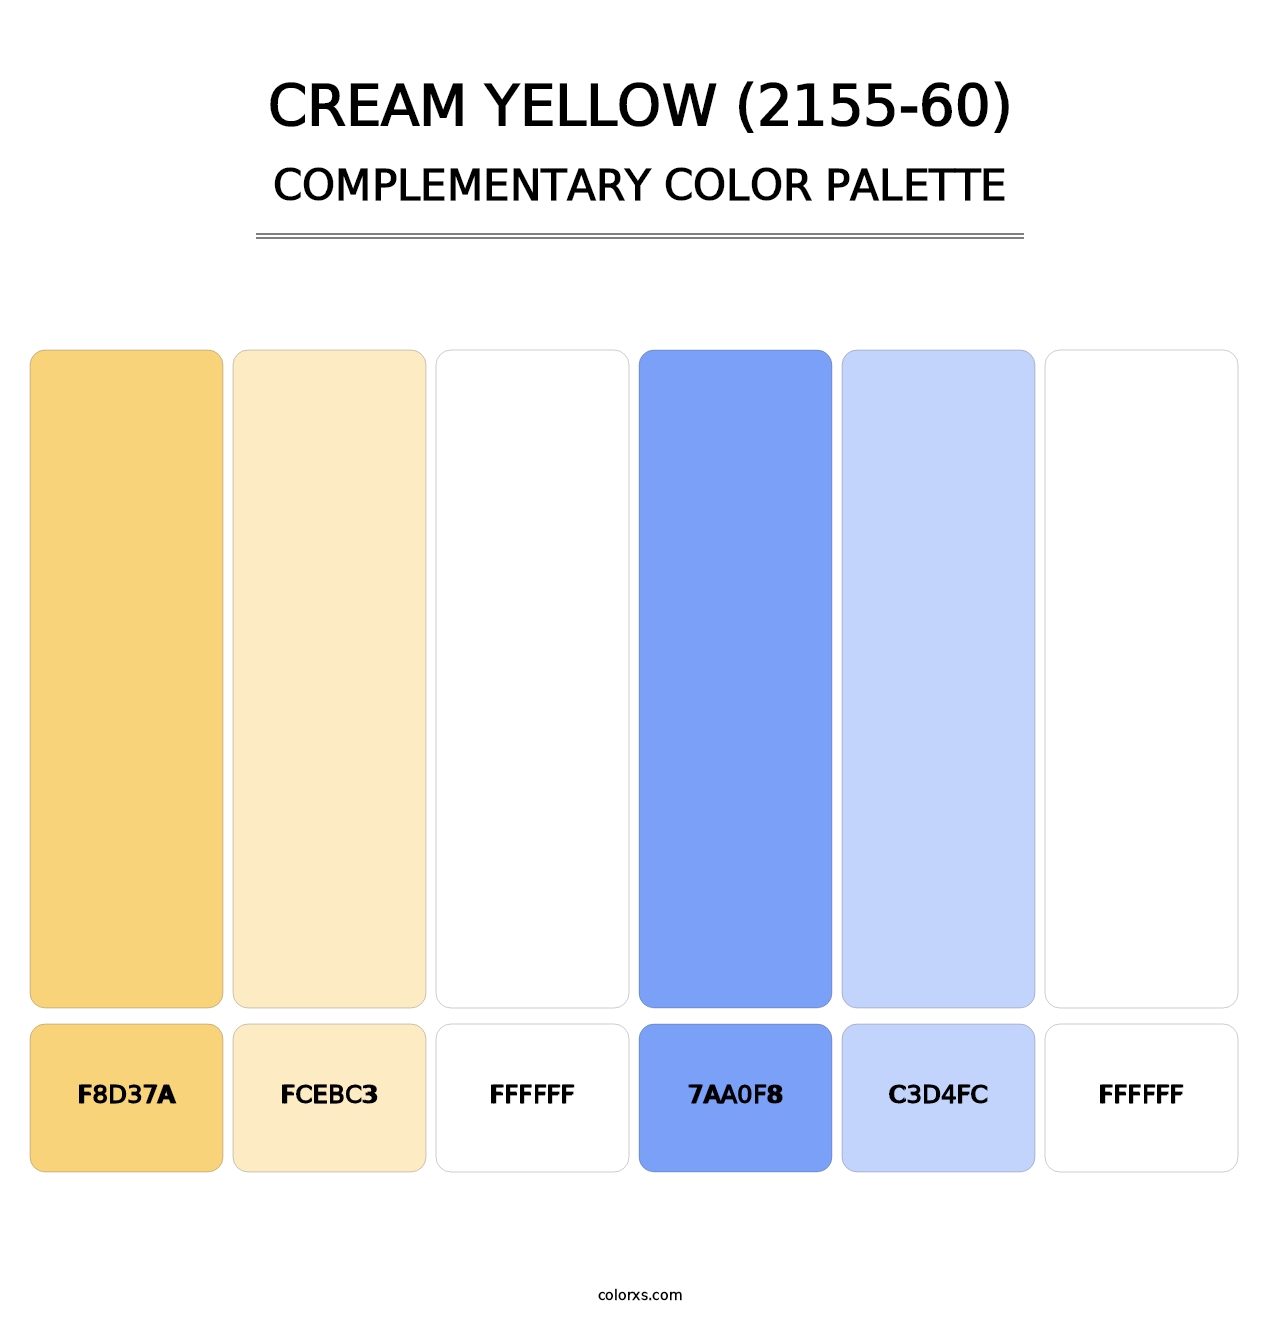 Cream Yellow (2155-60) - Complementary Color Palette